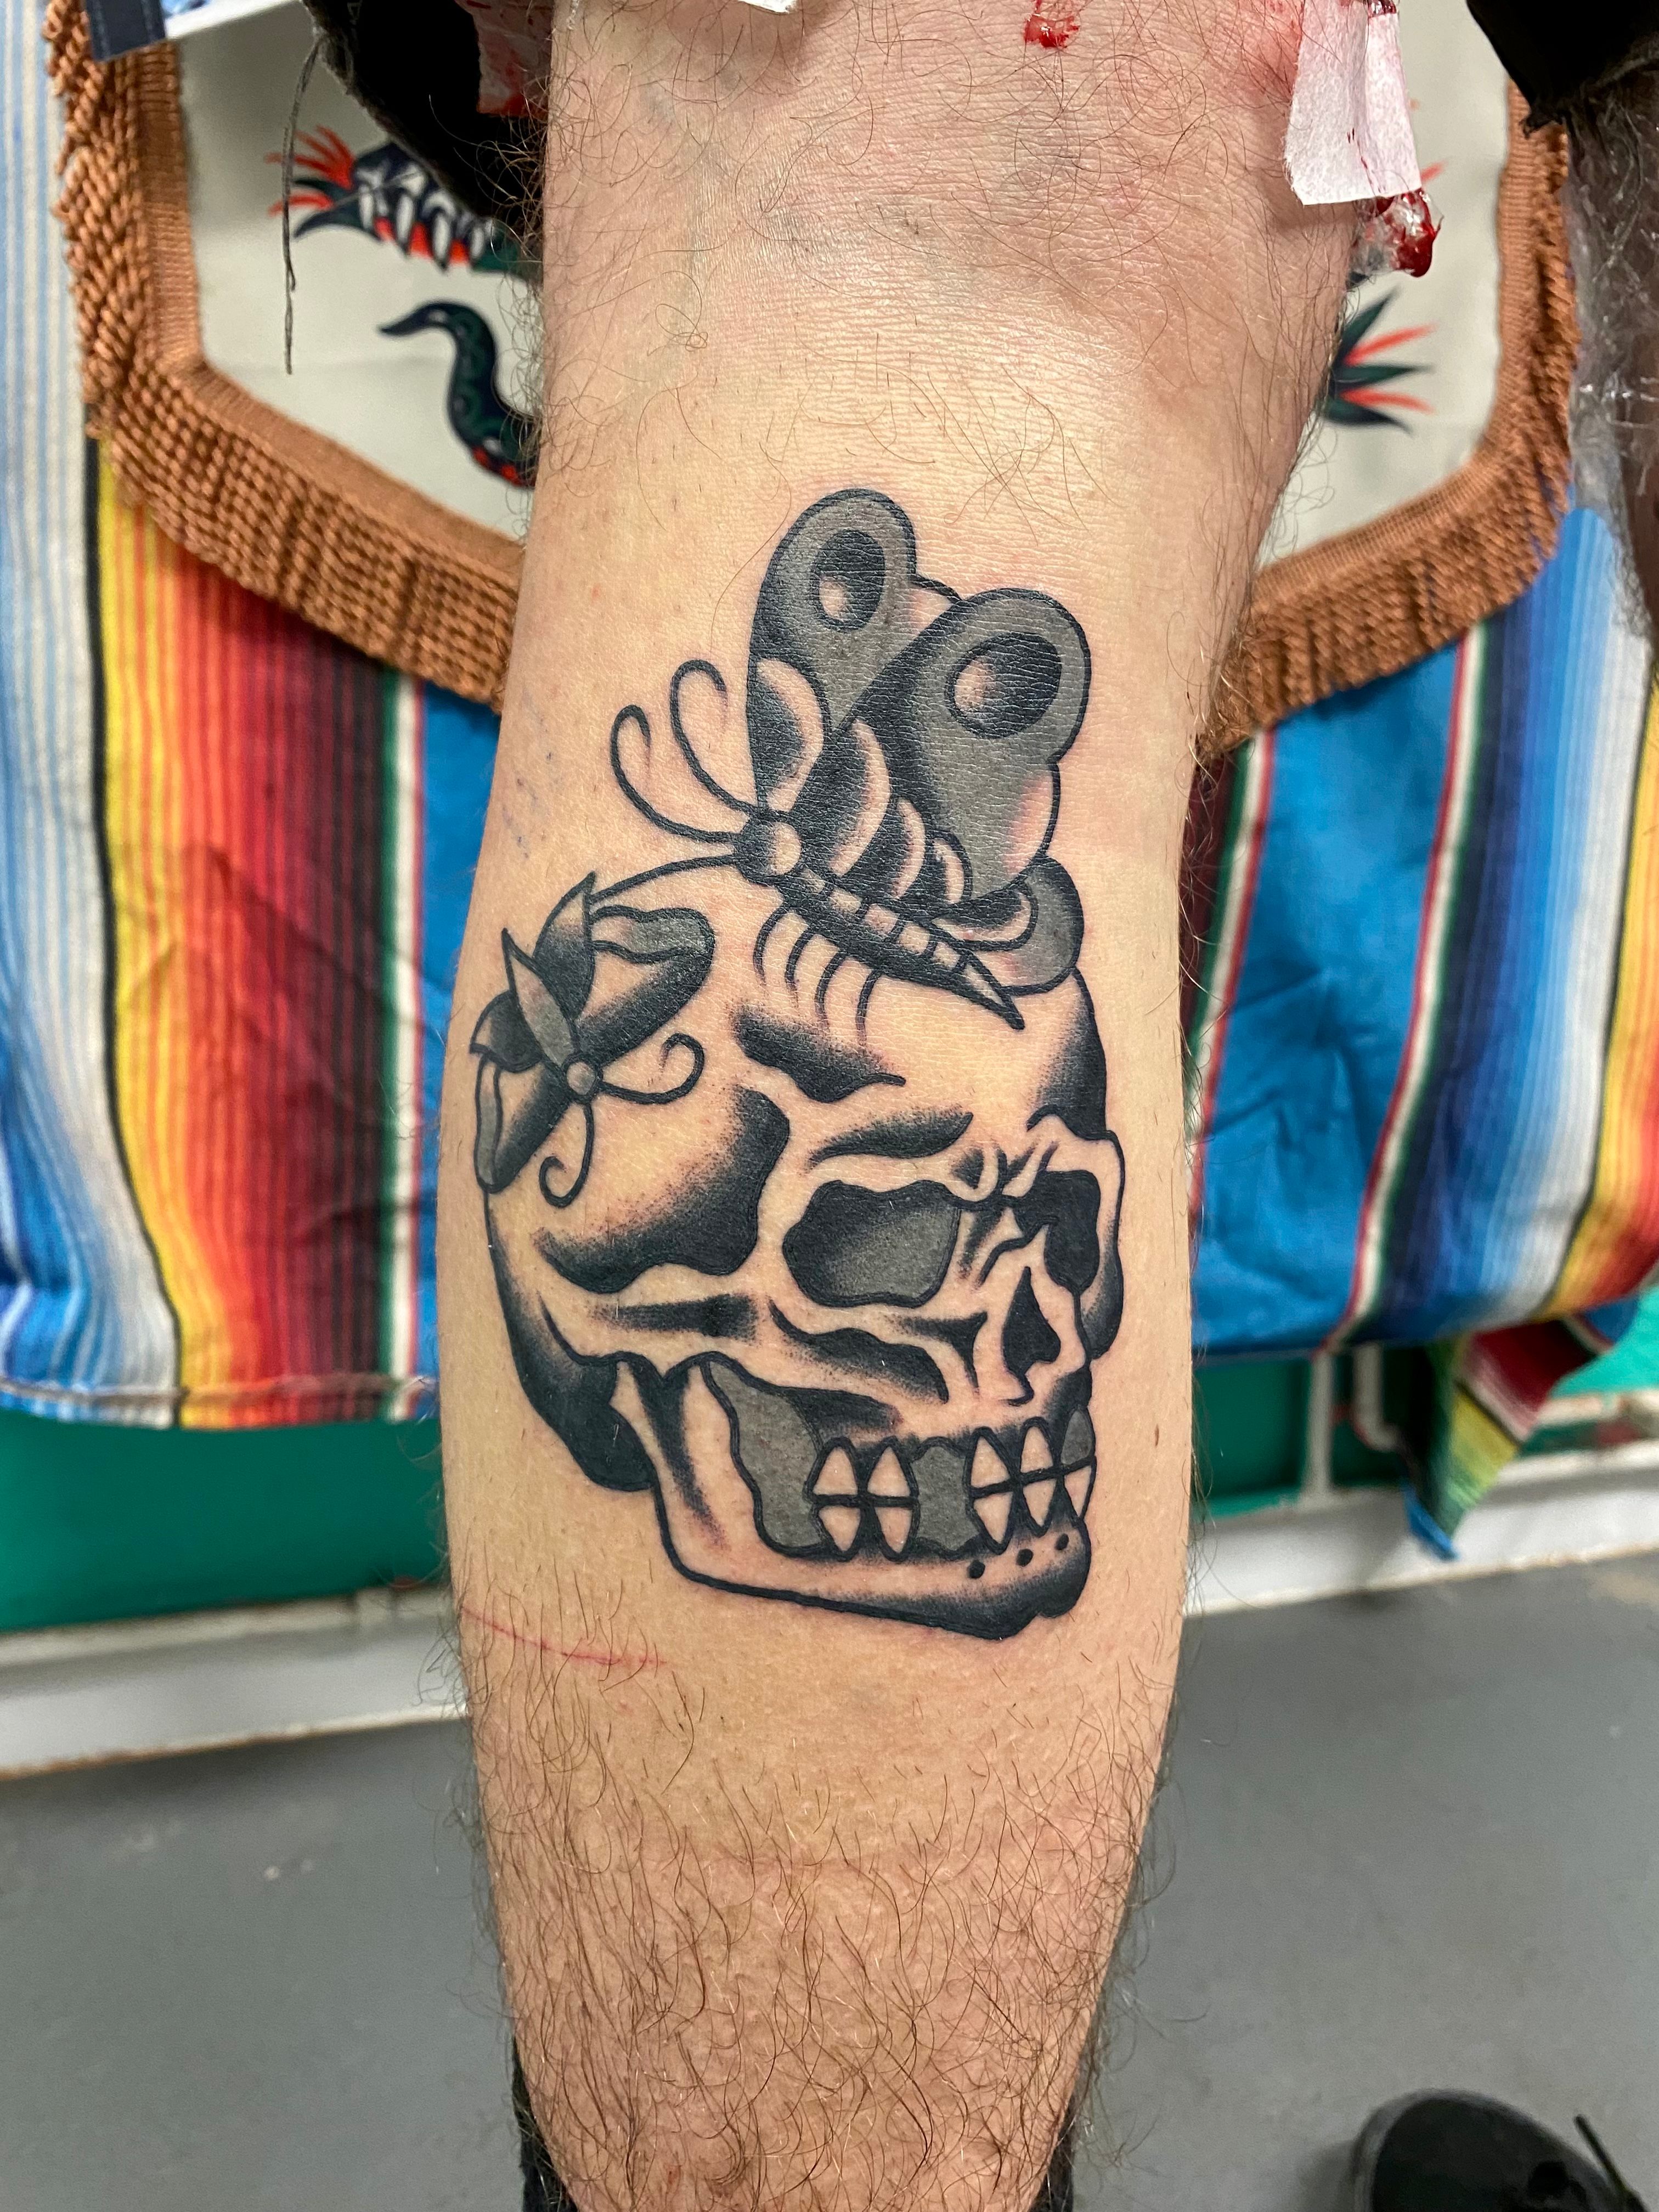 10 Artists Who Have Produced Remarkable Skull Tattoos – Scene360